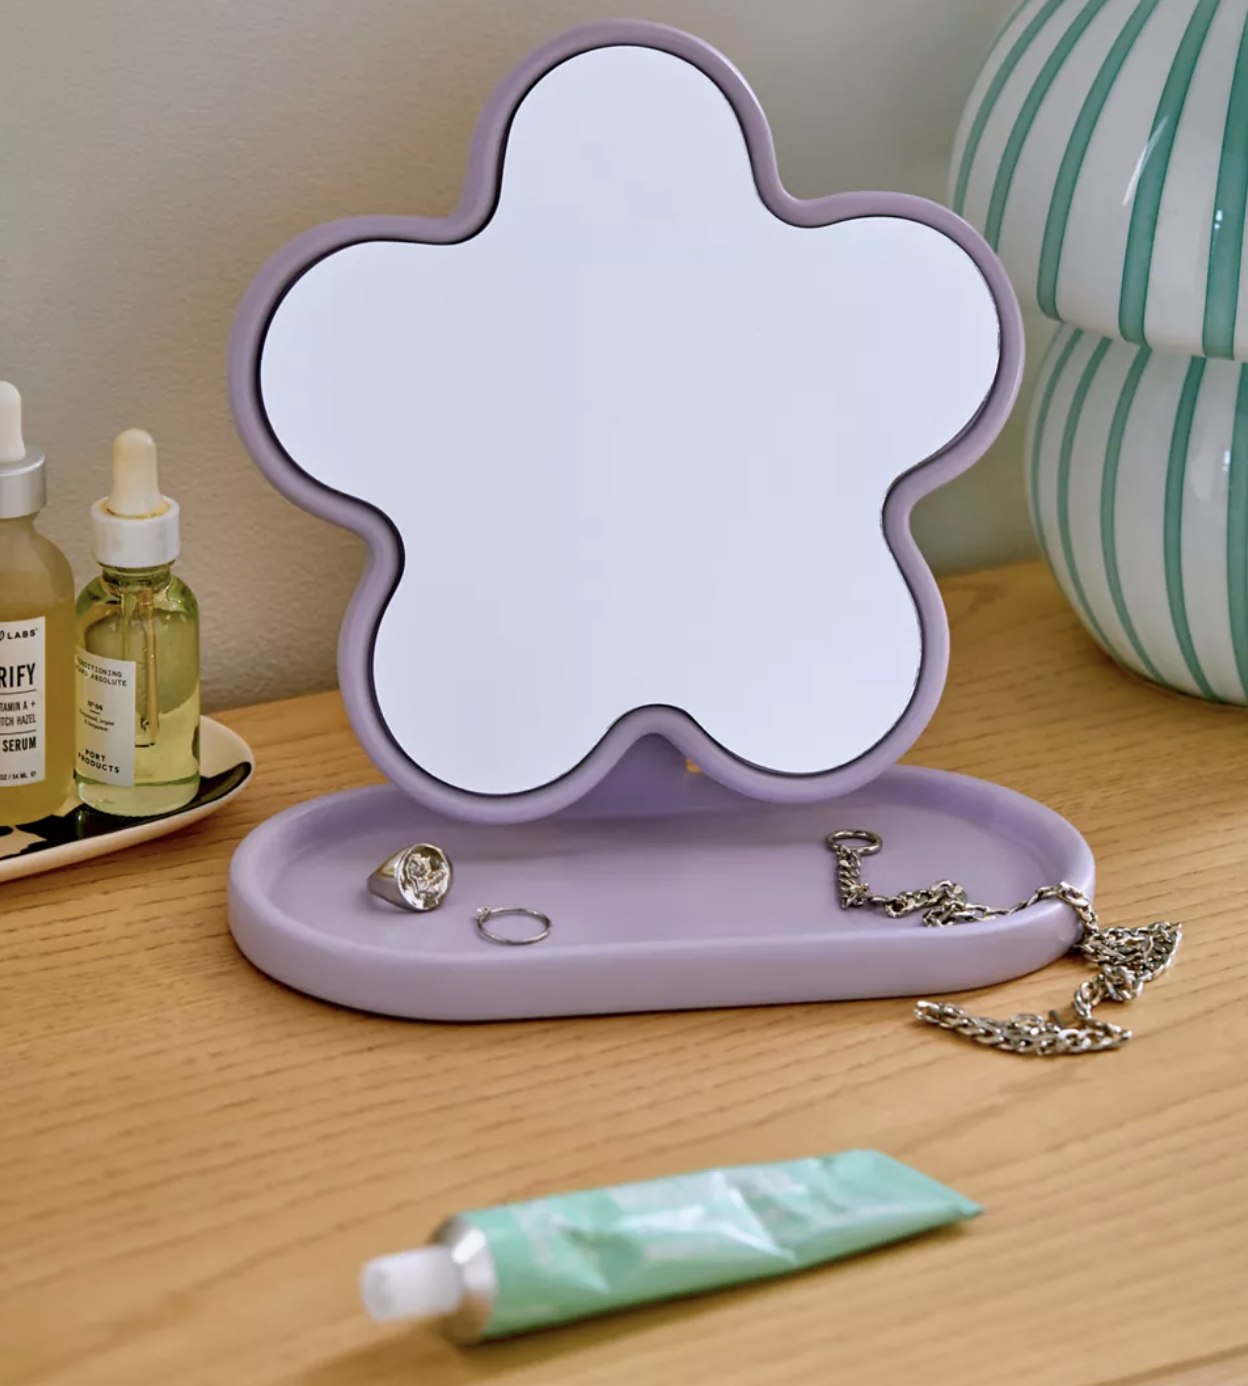 The mirror on a vanity with jewellery in its catchall dish